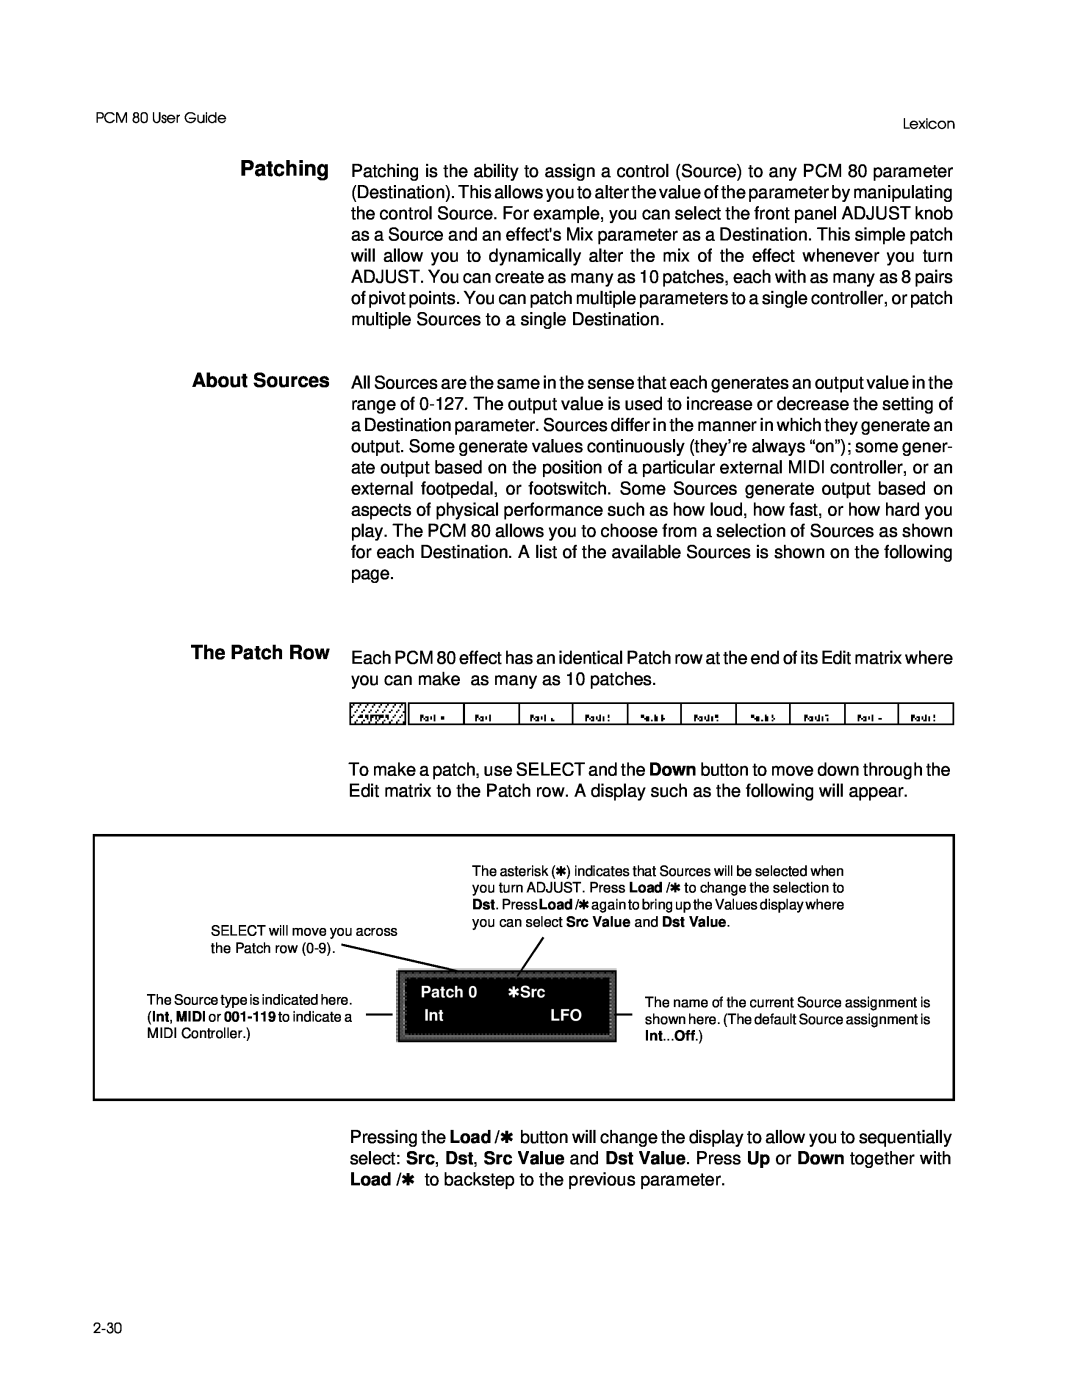 Lexicon PCM 80 manual About Sources, The Patch Row 